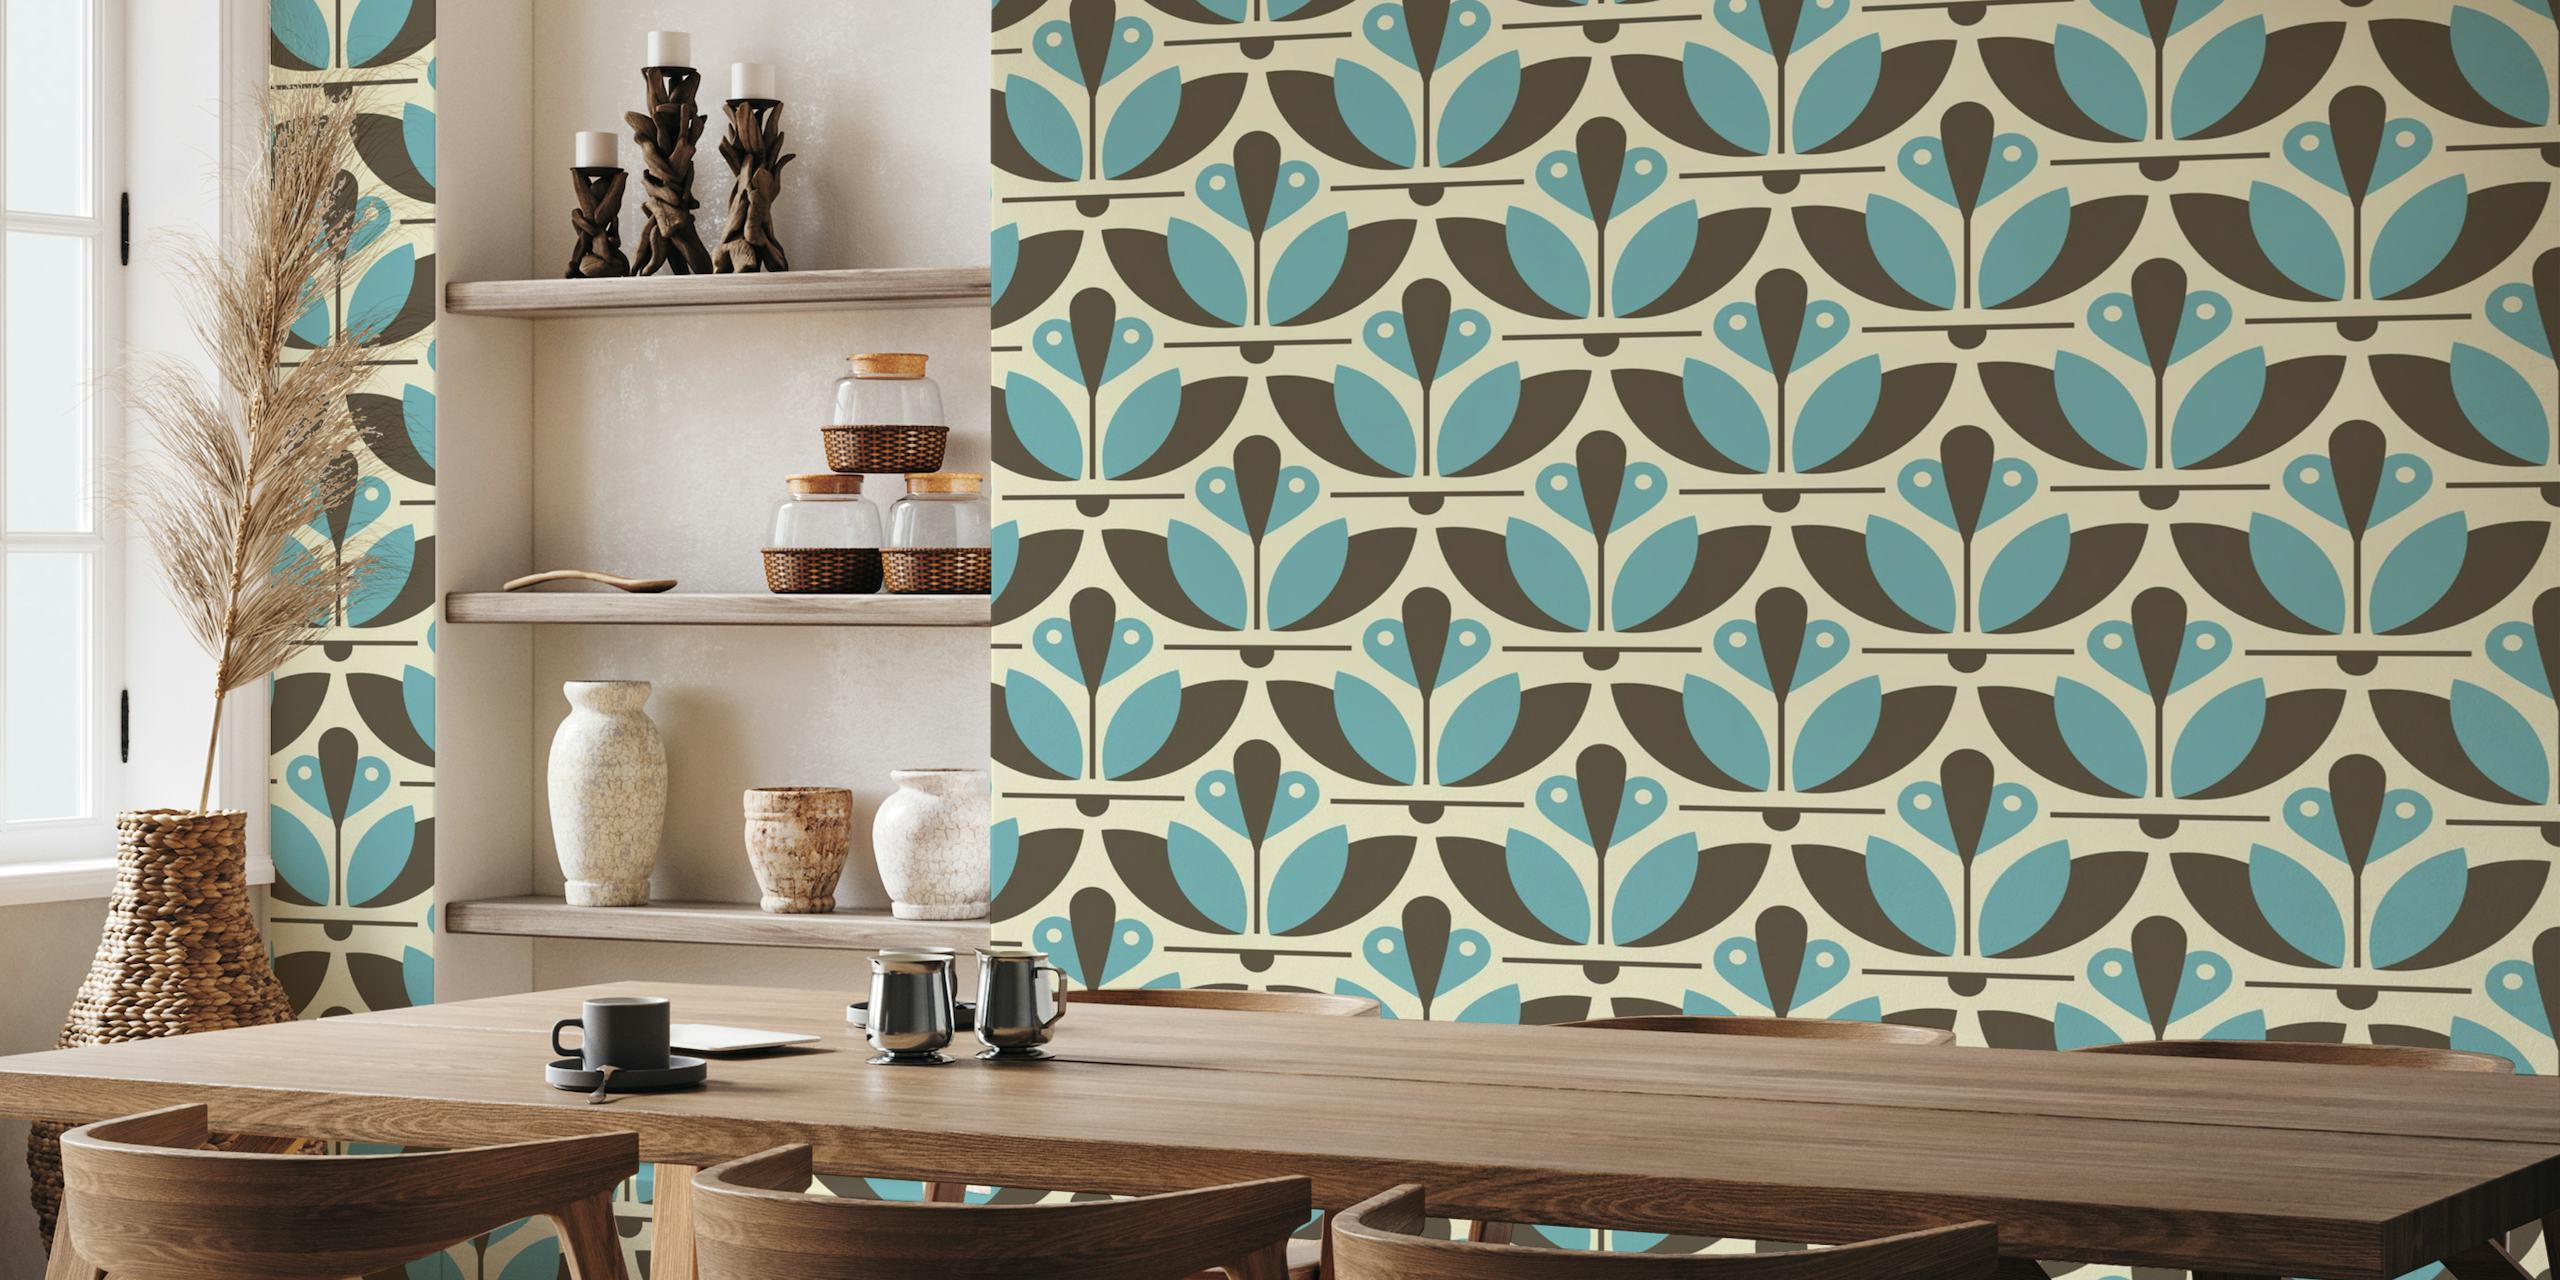 Stylized blue, grey, and white abstract floral pattern wall mural